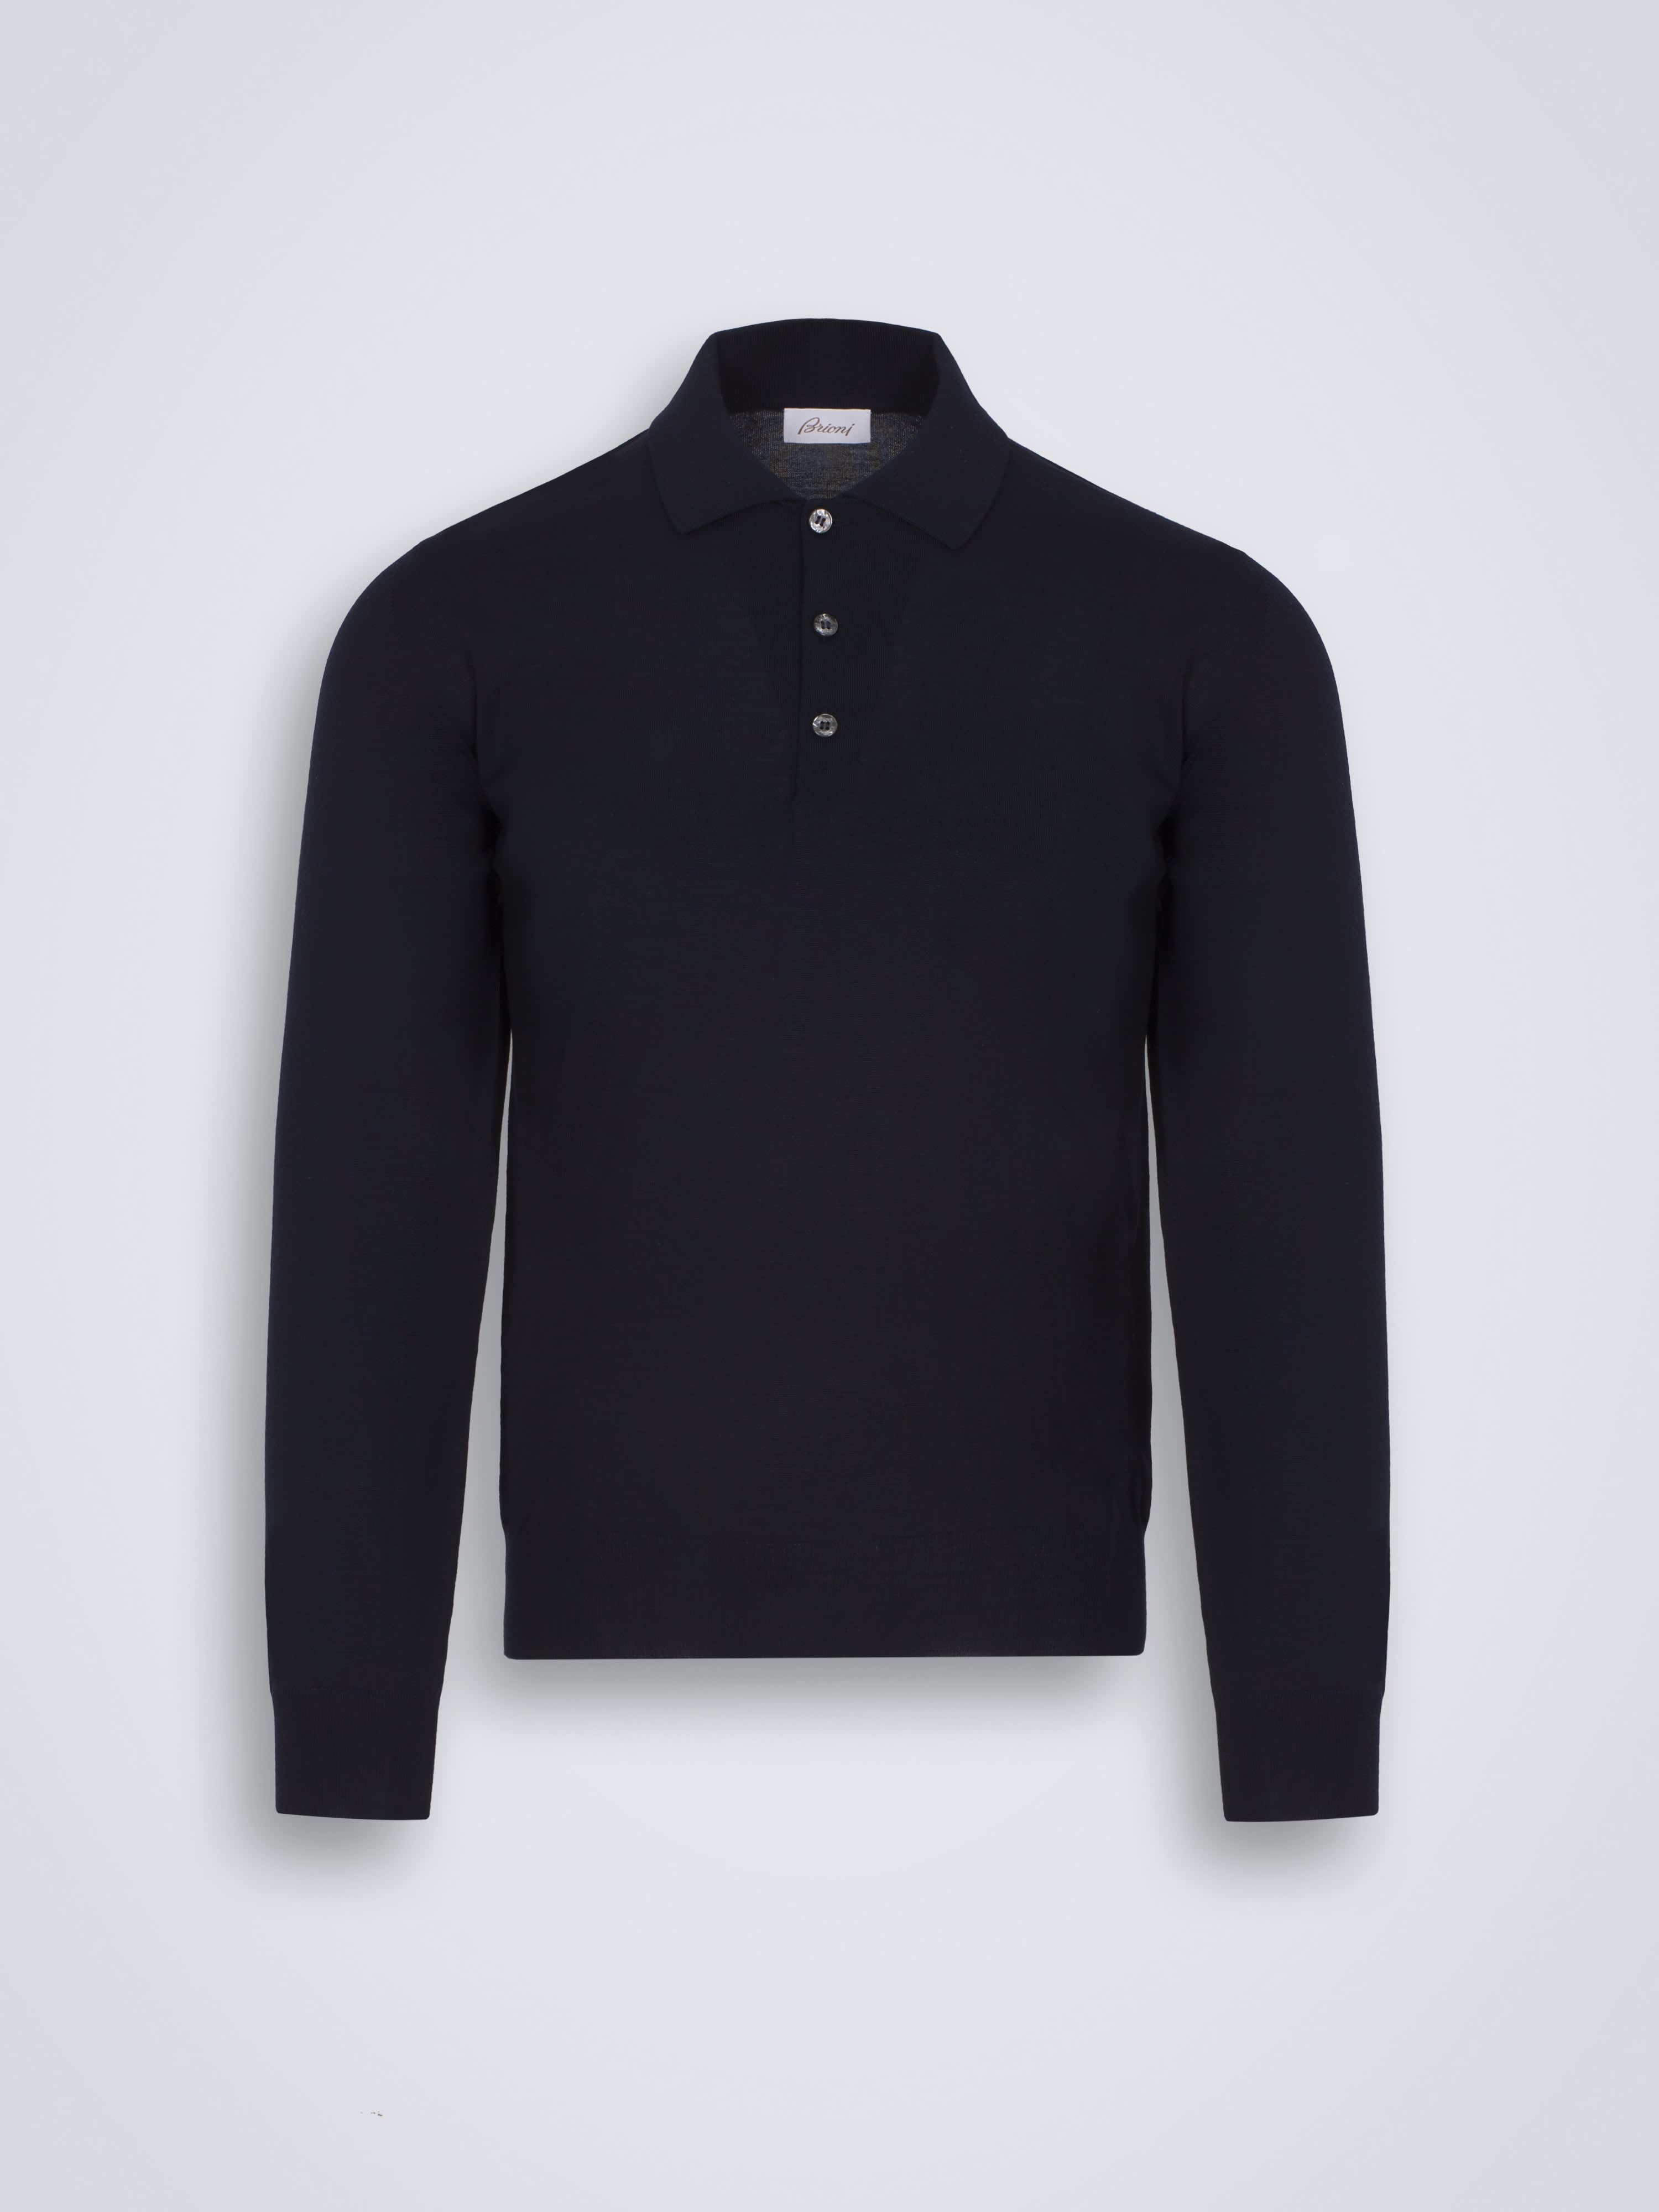 'Essential' navy blue long-sleeved polo shirt | Brioni® US Official Store